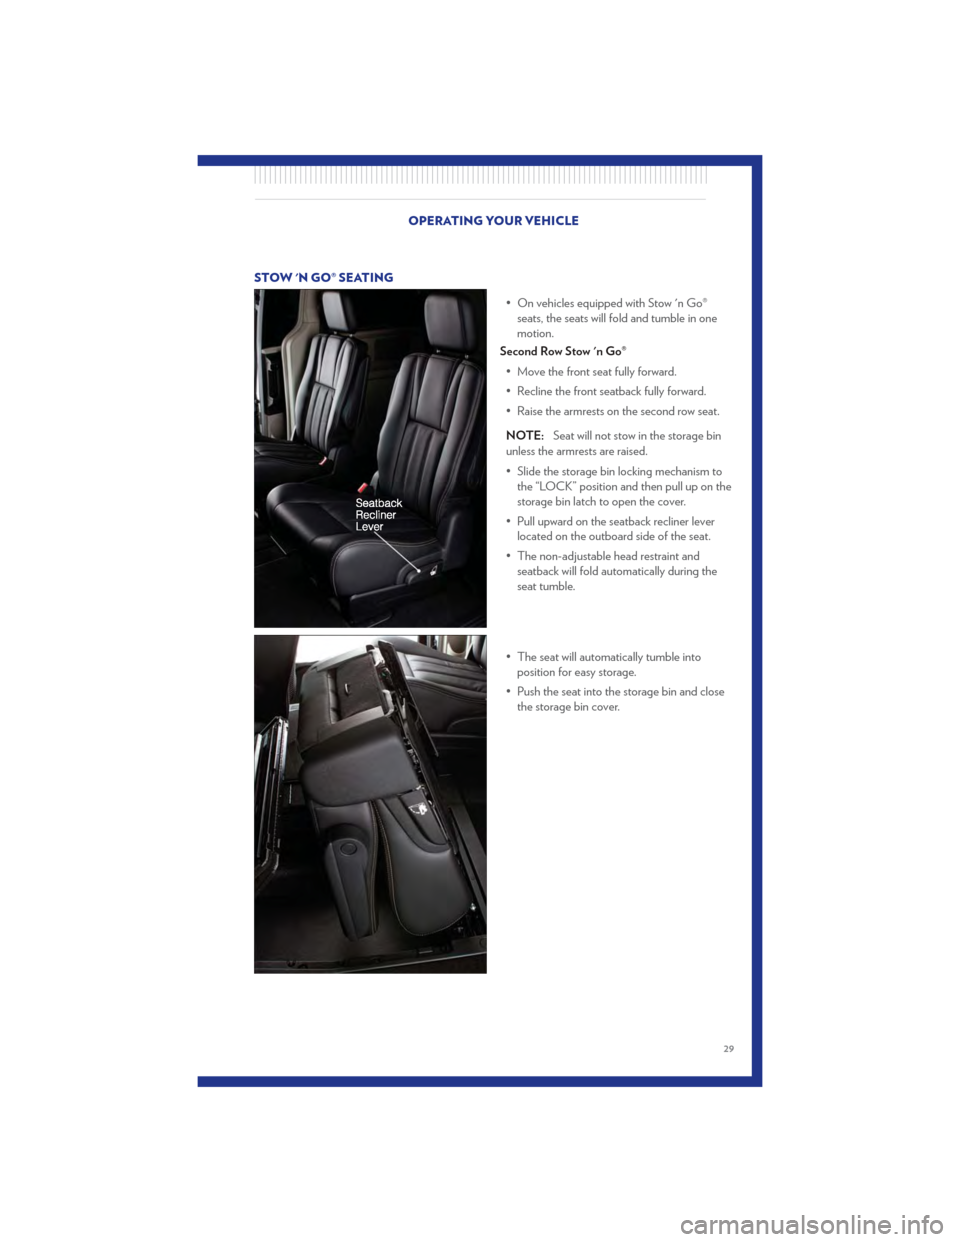 CHRYSLER TOWN AND COUNTRY 2011 5.G User Guide STOW N GO® SEATING• On vehicles equipped with Stow n Go®seats, the seats will fold and tumble in one
motion.
Second Row Stow n Go®
• Move the front seat fully forward.
• Recline the front 